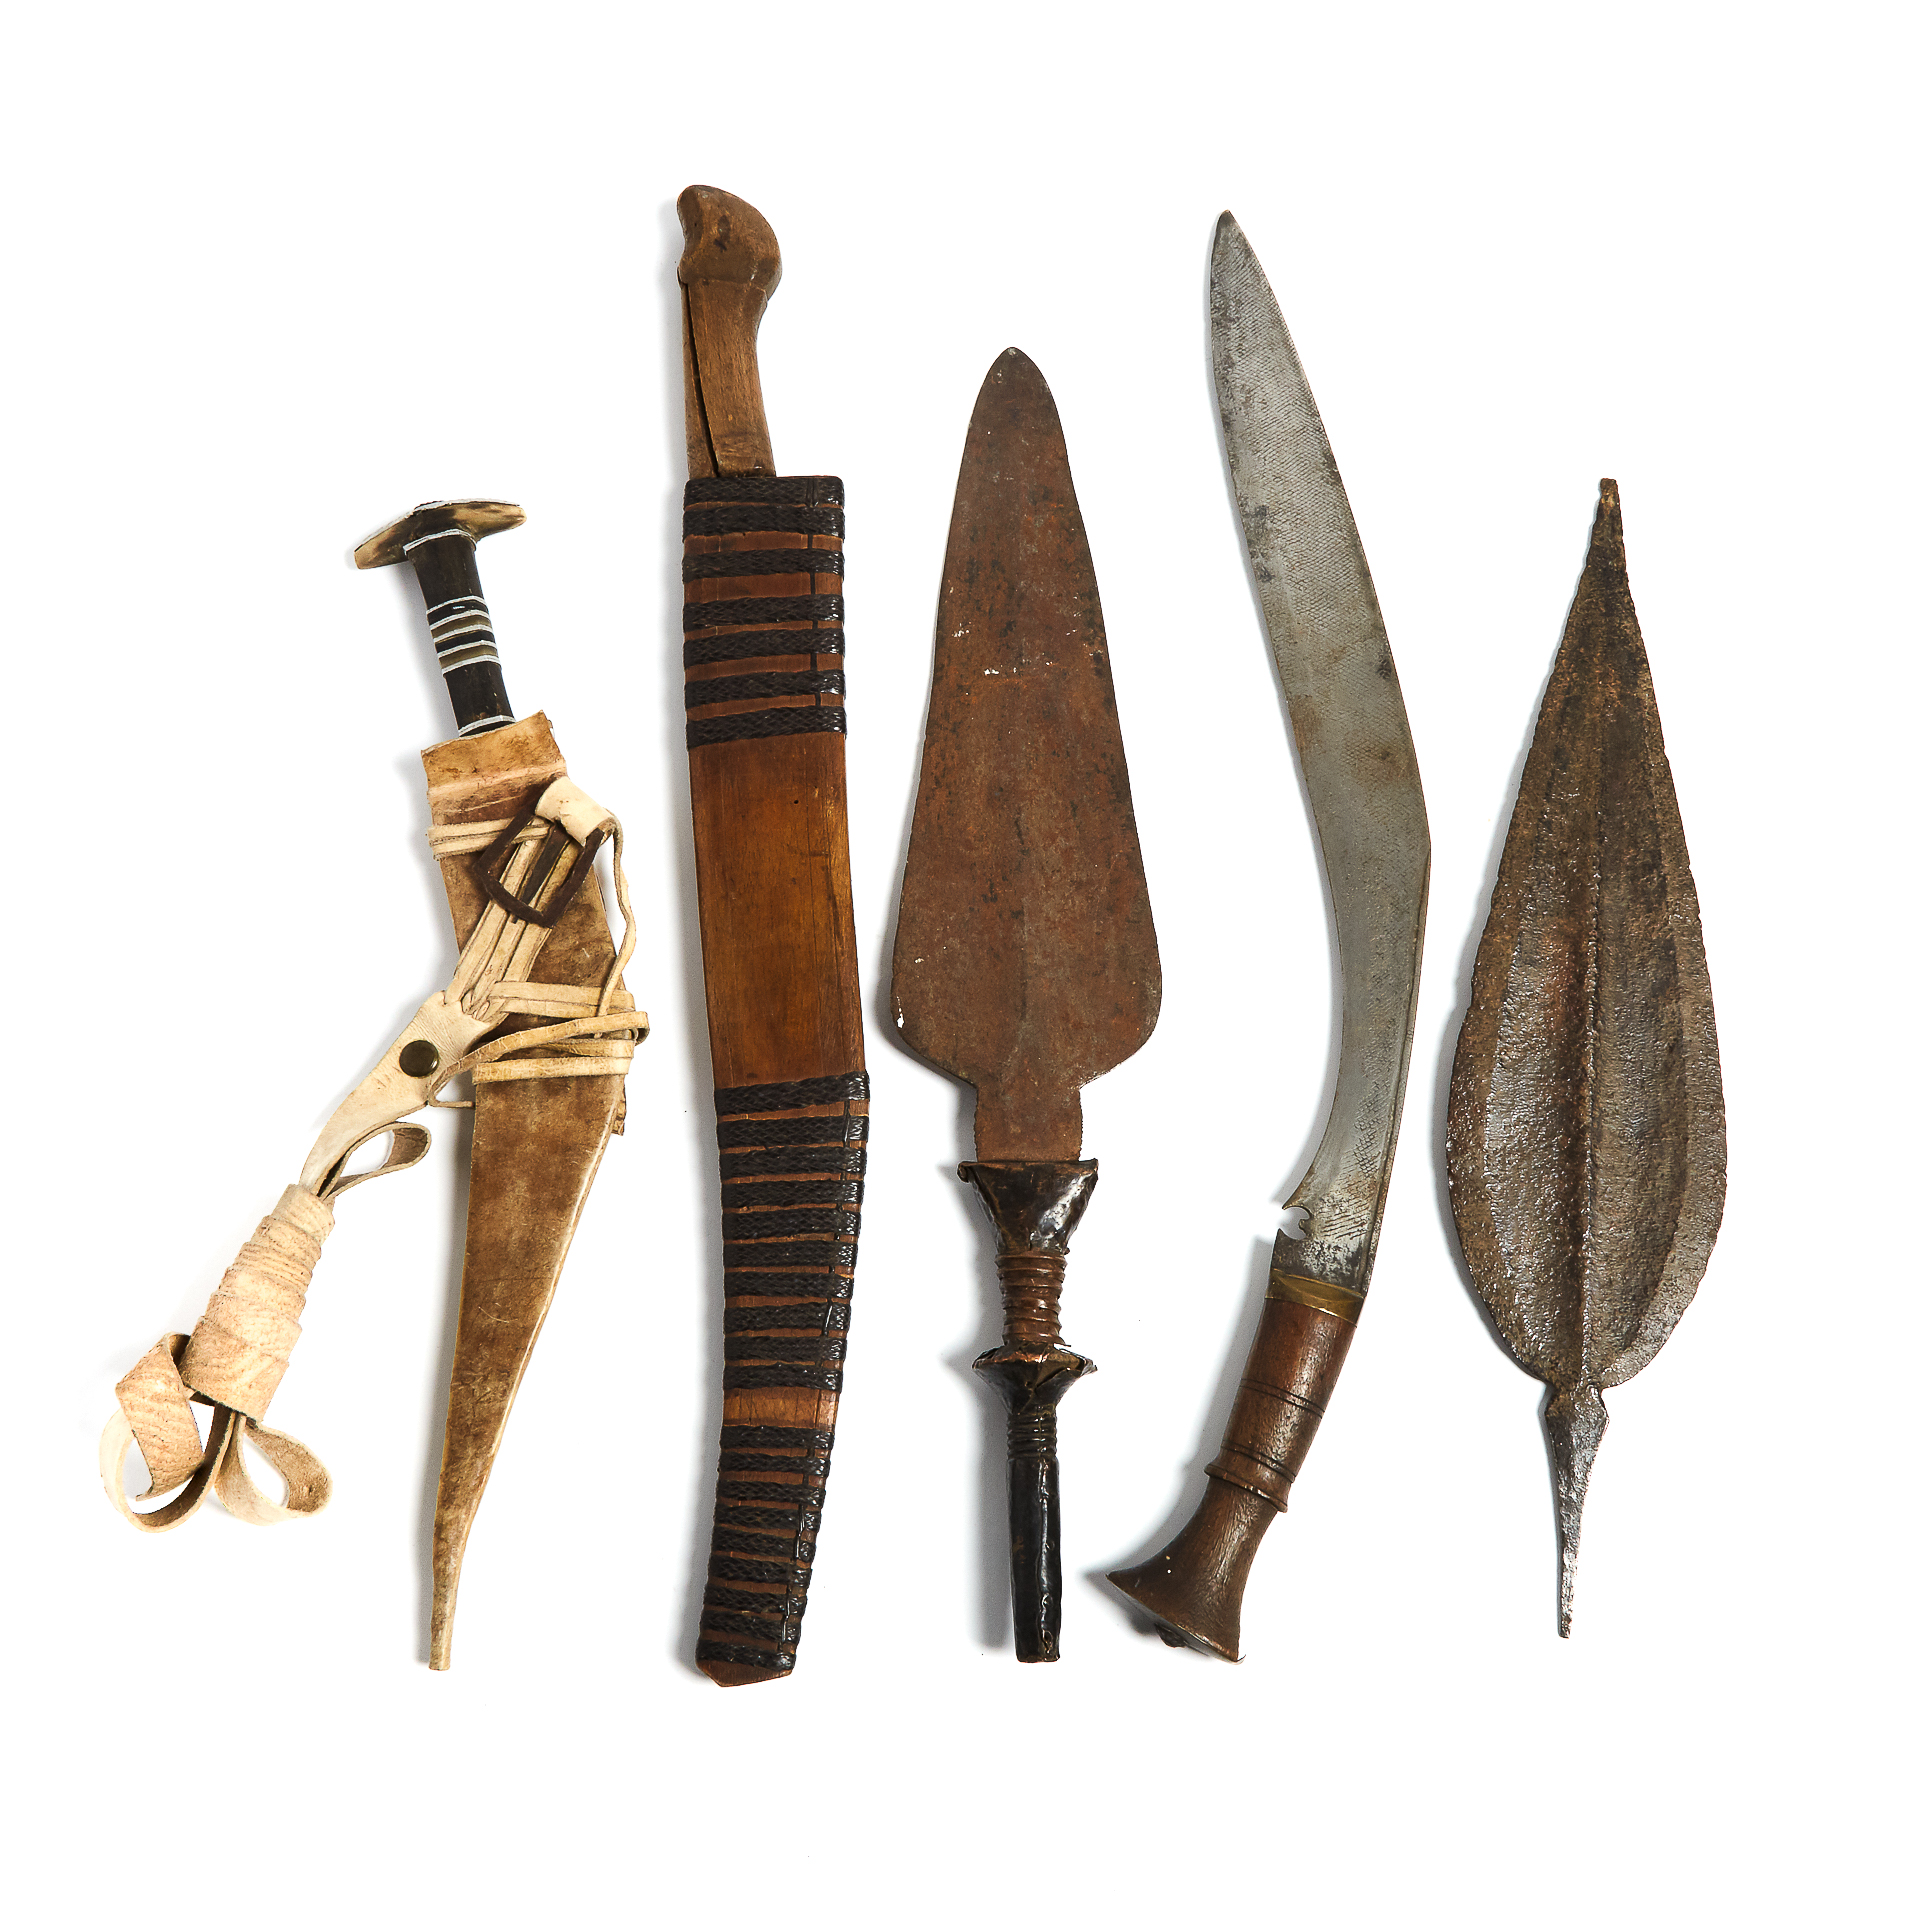 Group of Five African Edged Weapons